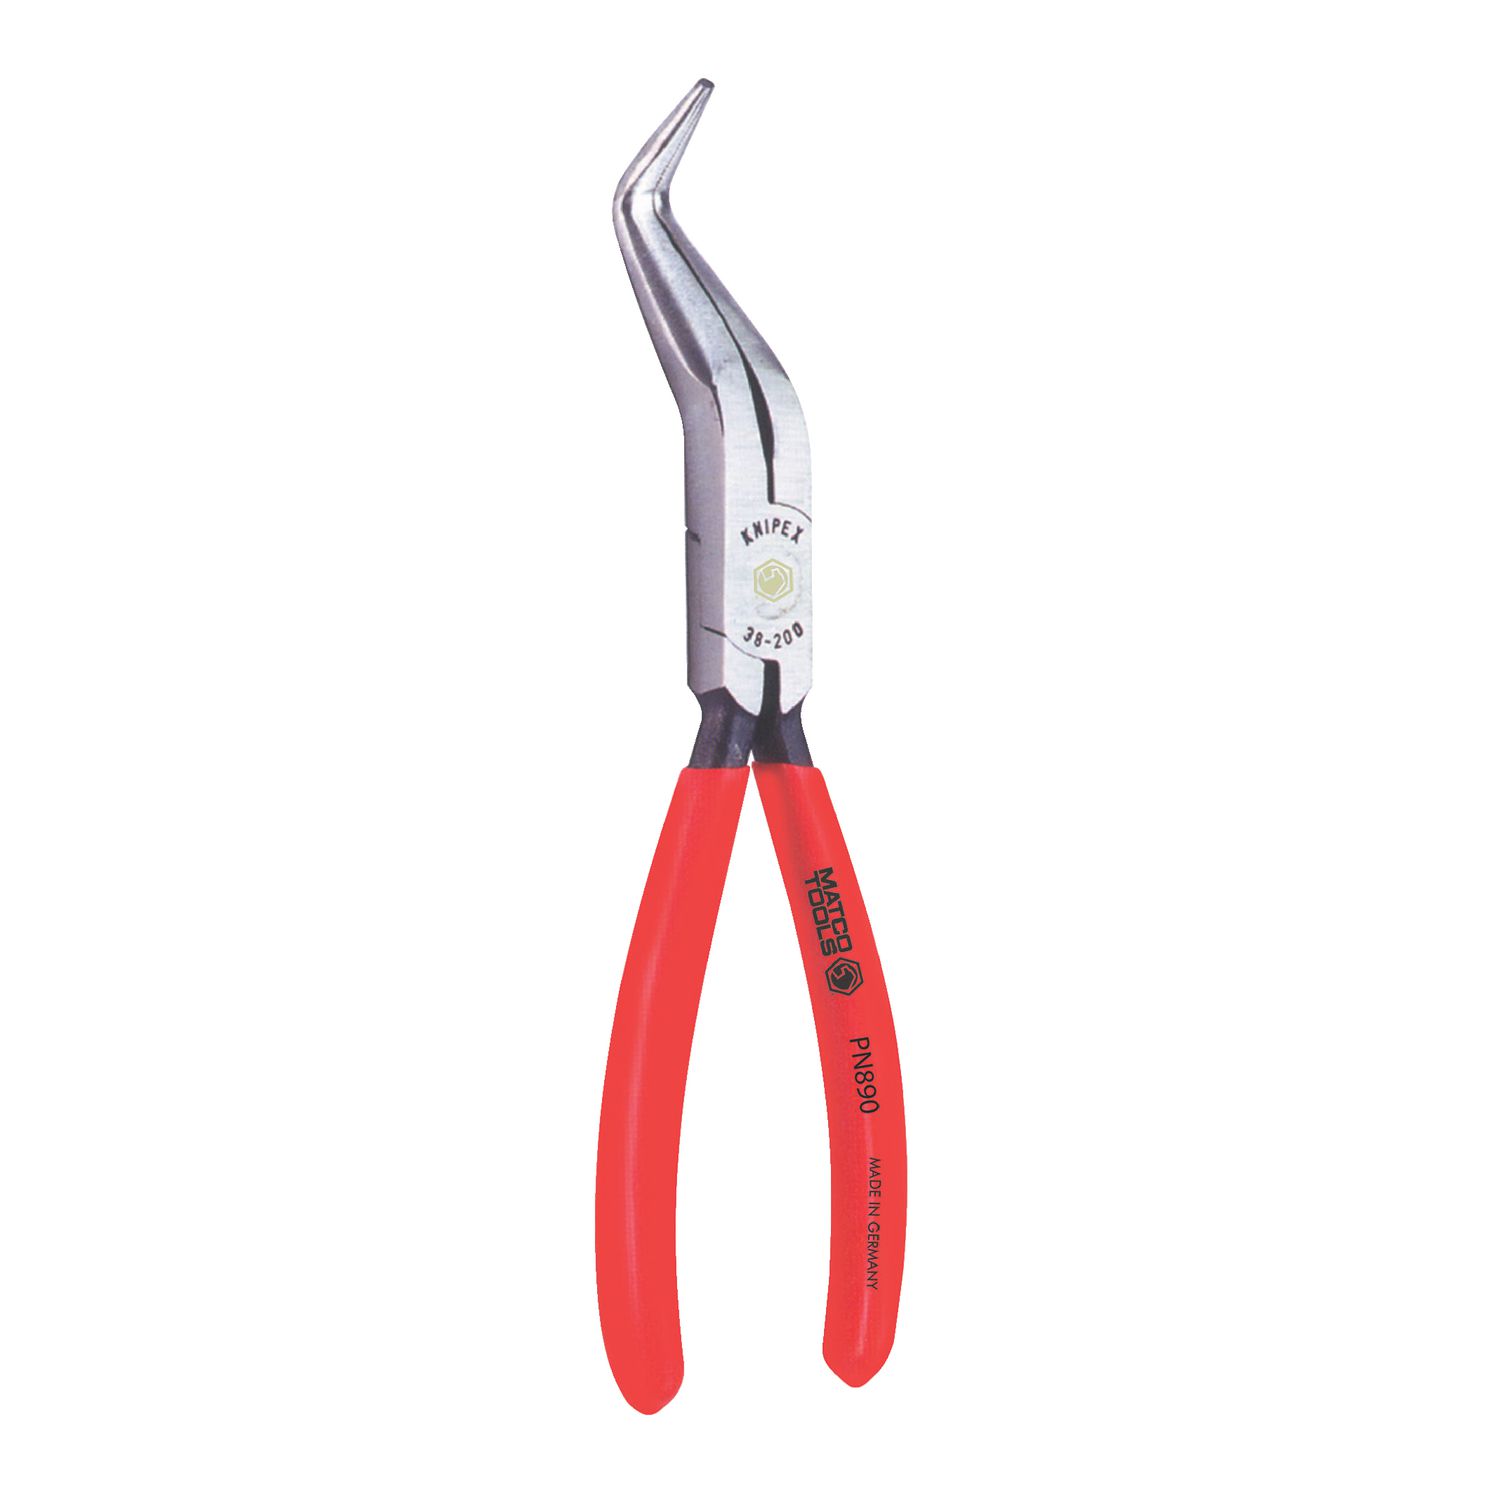 Knipex Bent Double Angle Needle Nose Pliers PN890 | Matco Tools